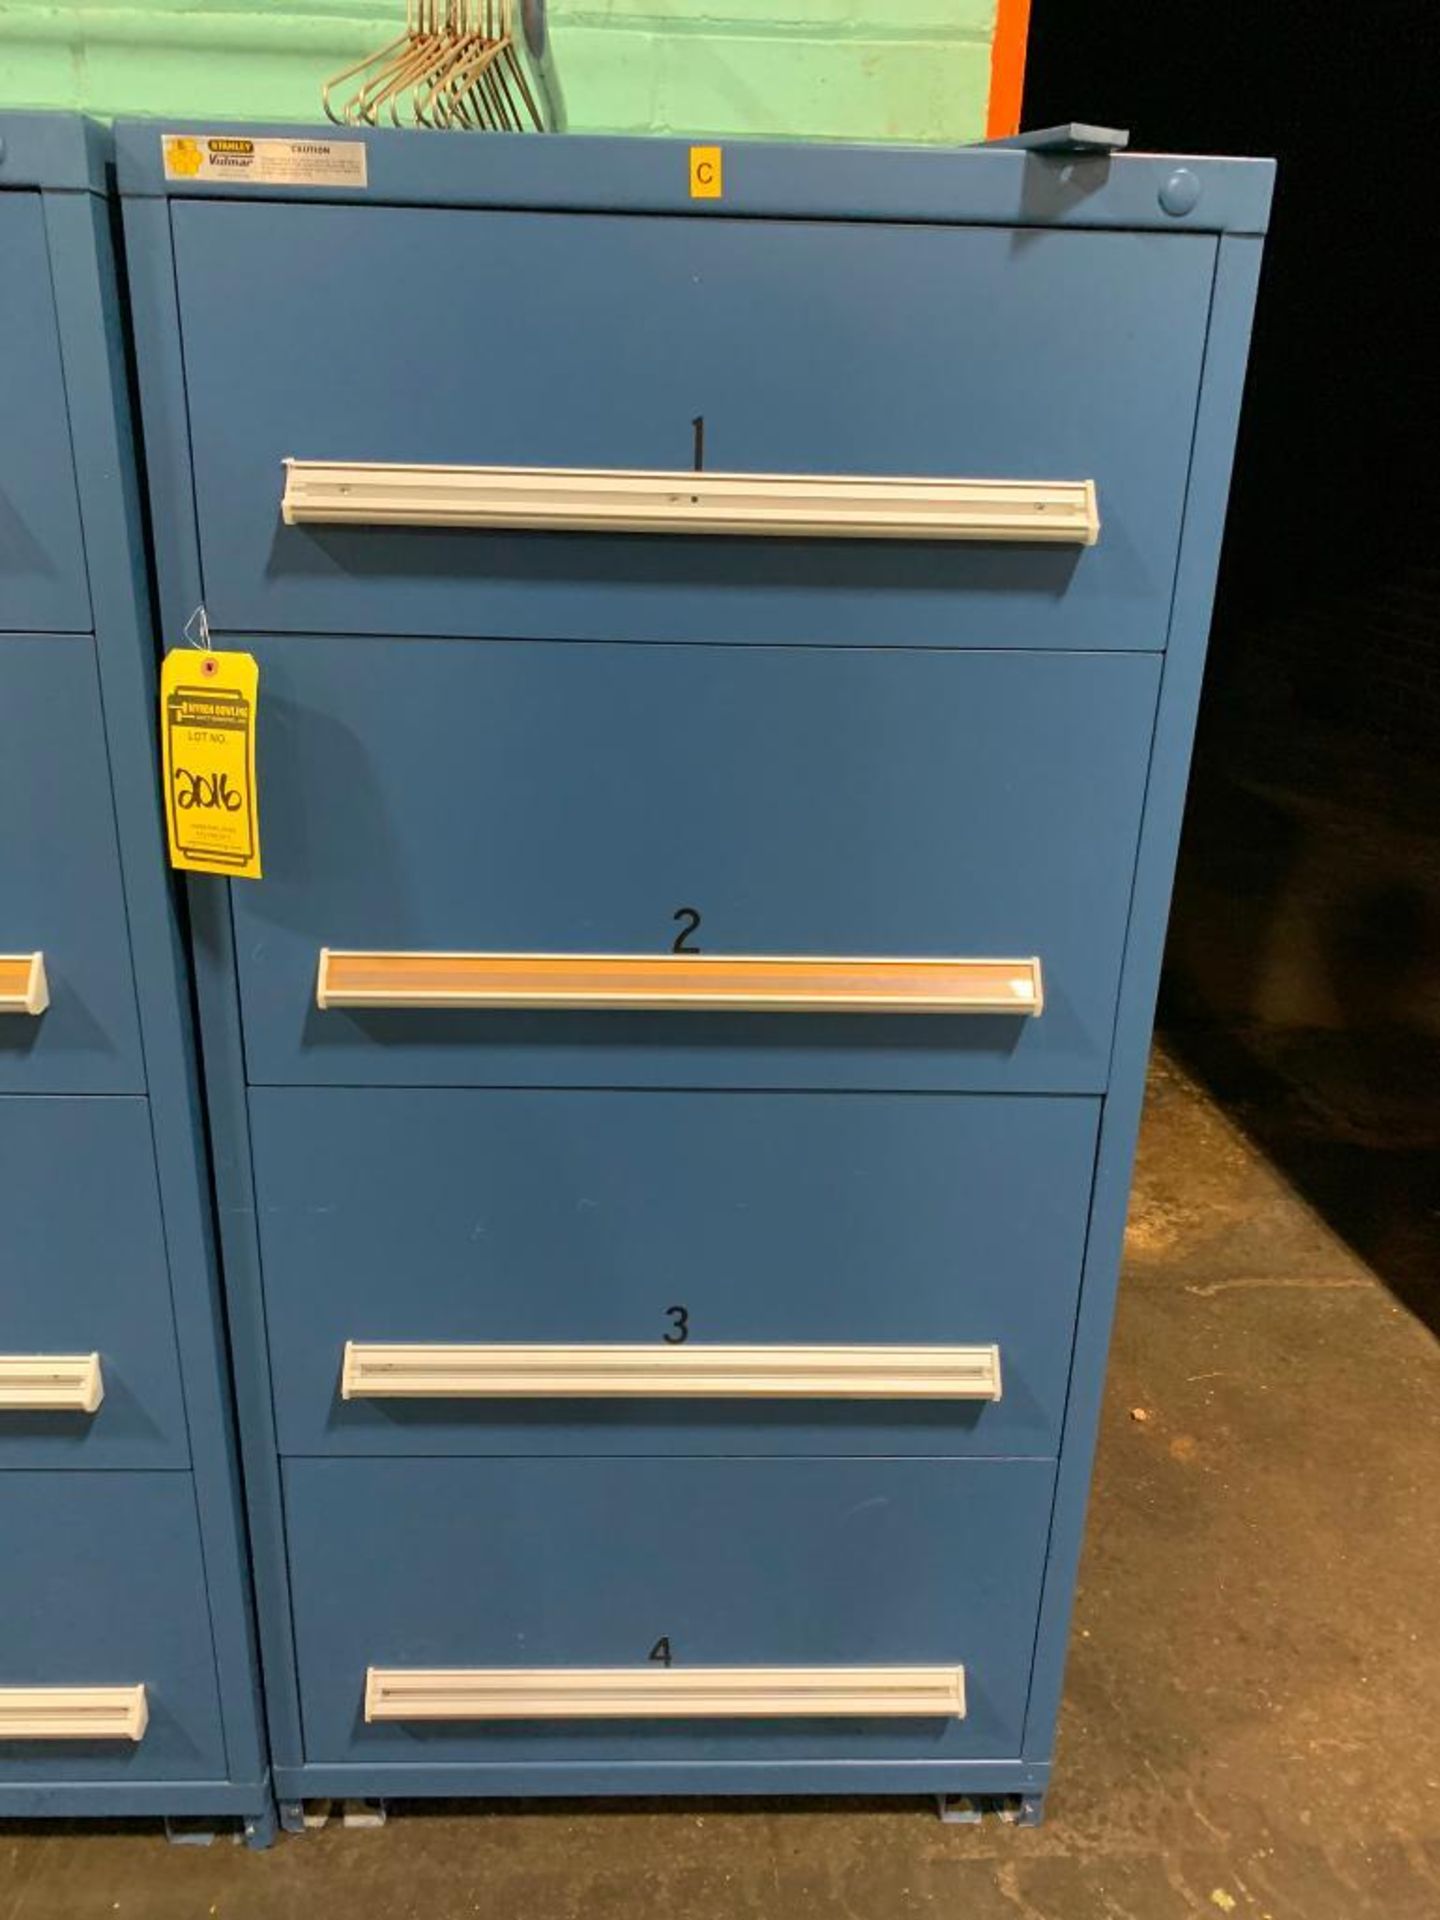 Stanley Vidmar 4-Drawer Cabinet w/ Electrical Support Equipment; Circuit Board, Brake Resistor, Asso